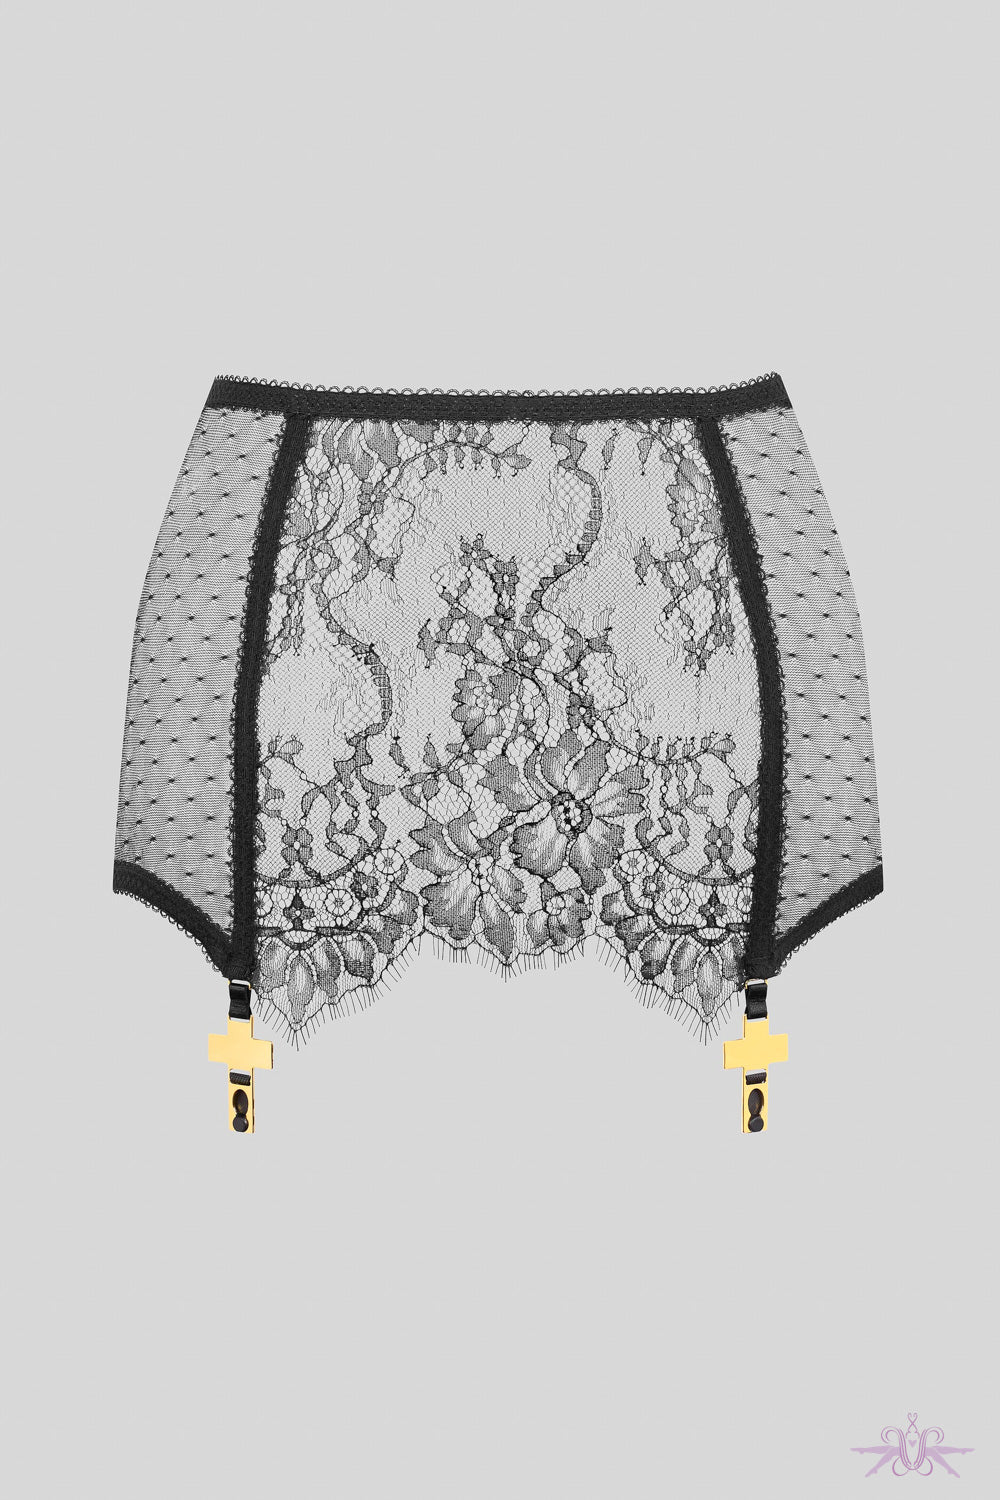 Maison Close Inspiration Divine Mini Skirt with Suspenders at the